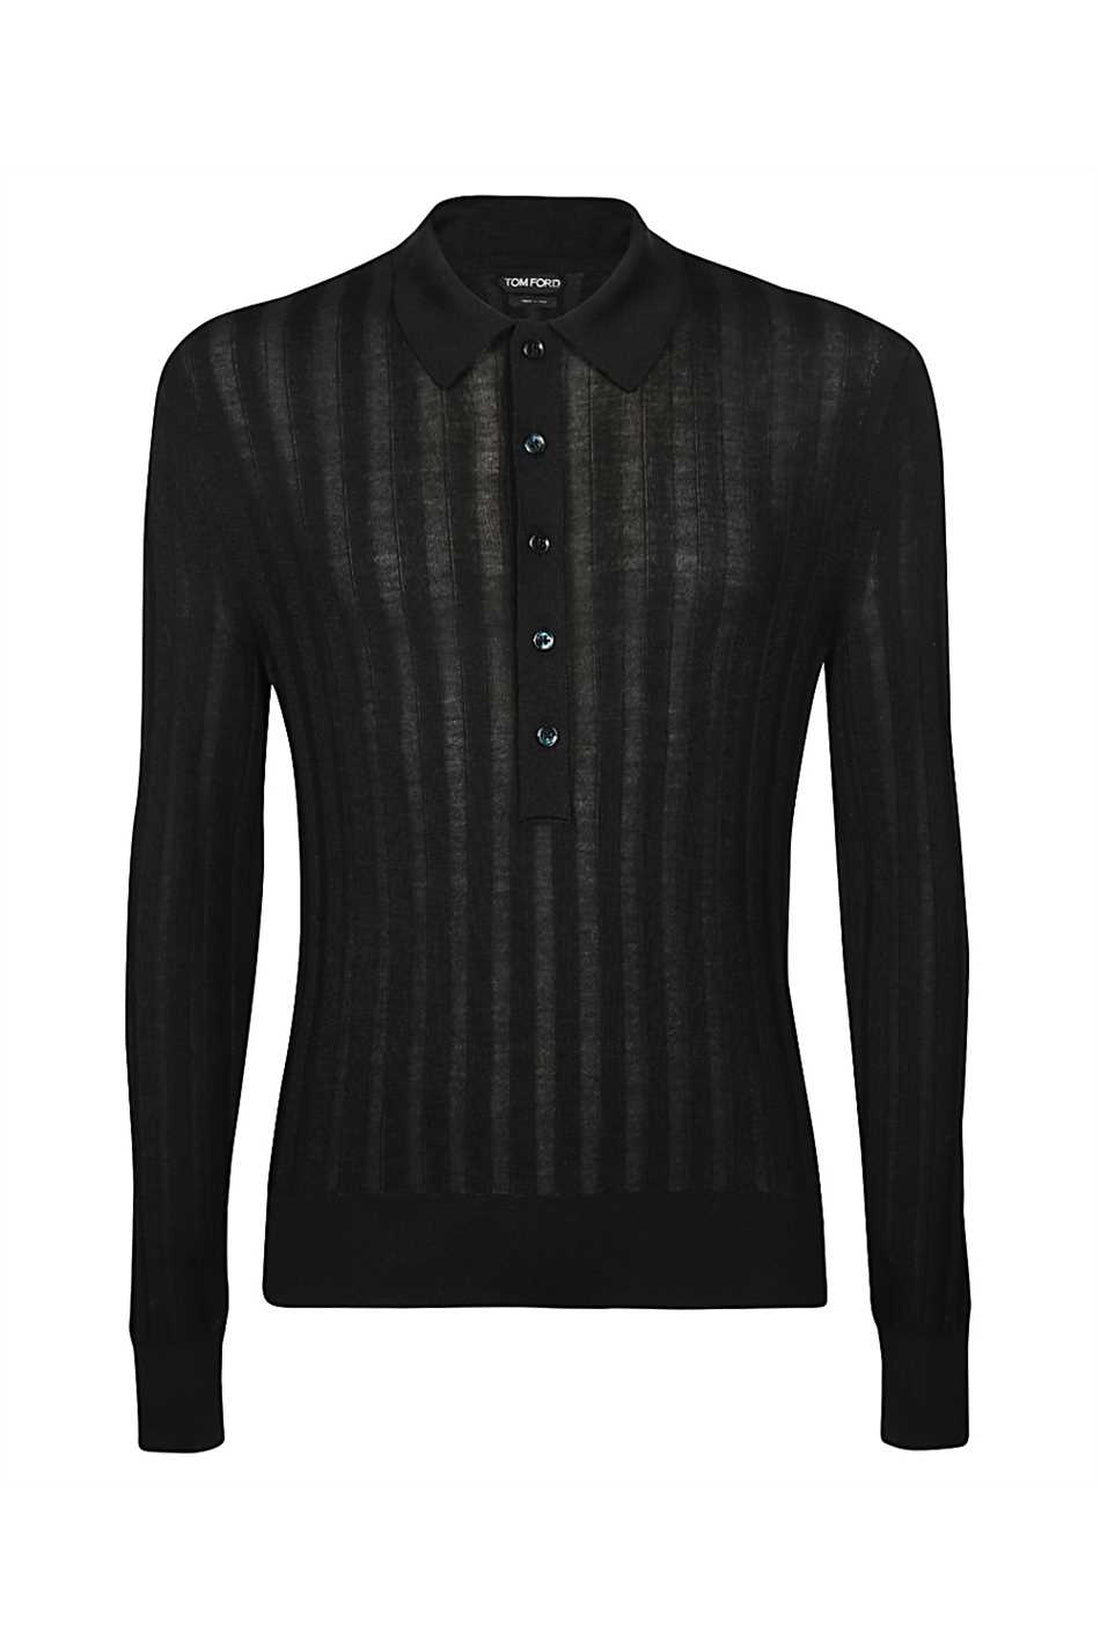 Tom Ford-OUTLET-SALE-Ribbed knit polo shirt-ARCHIVIST